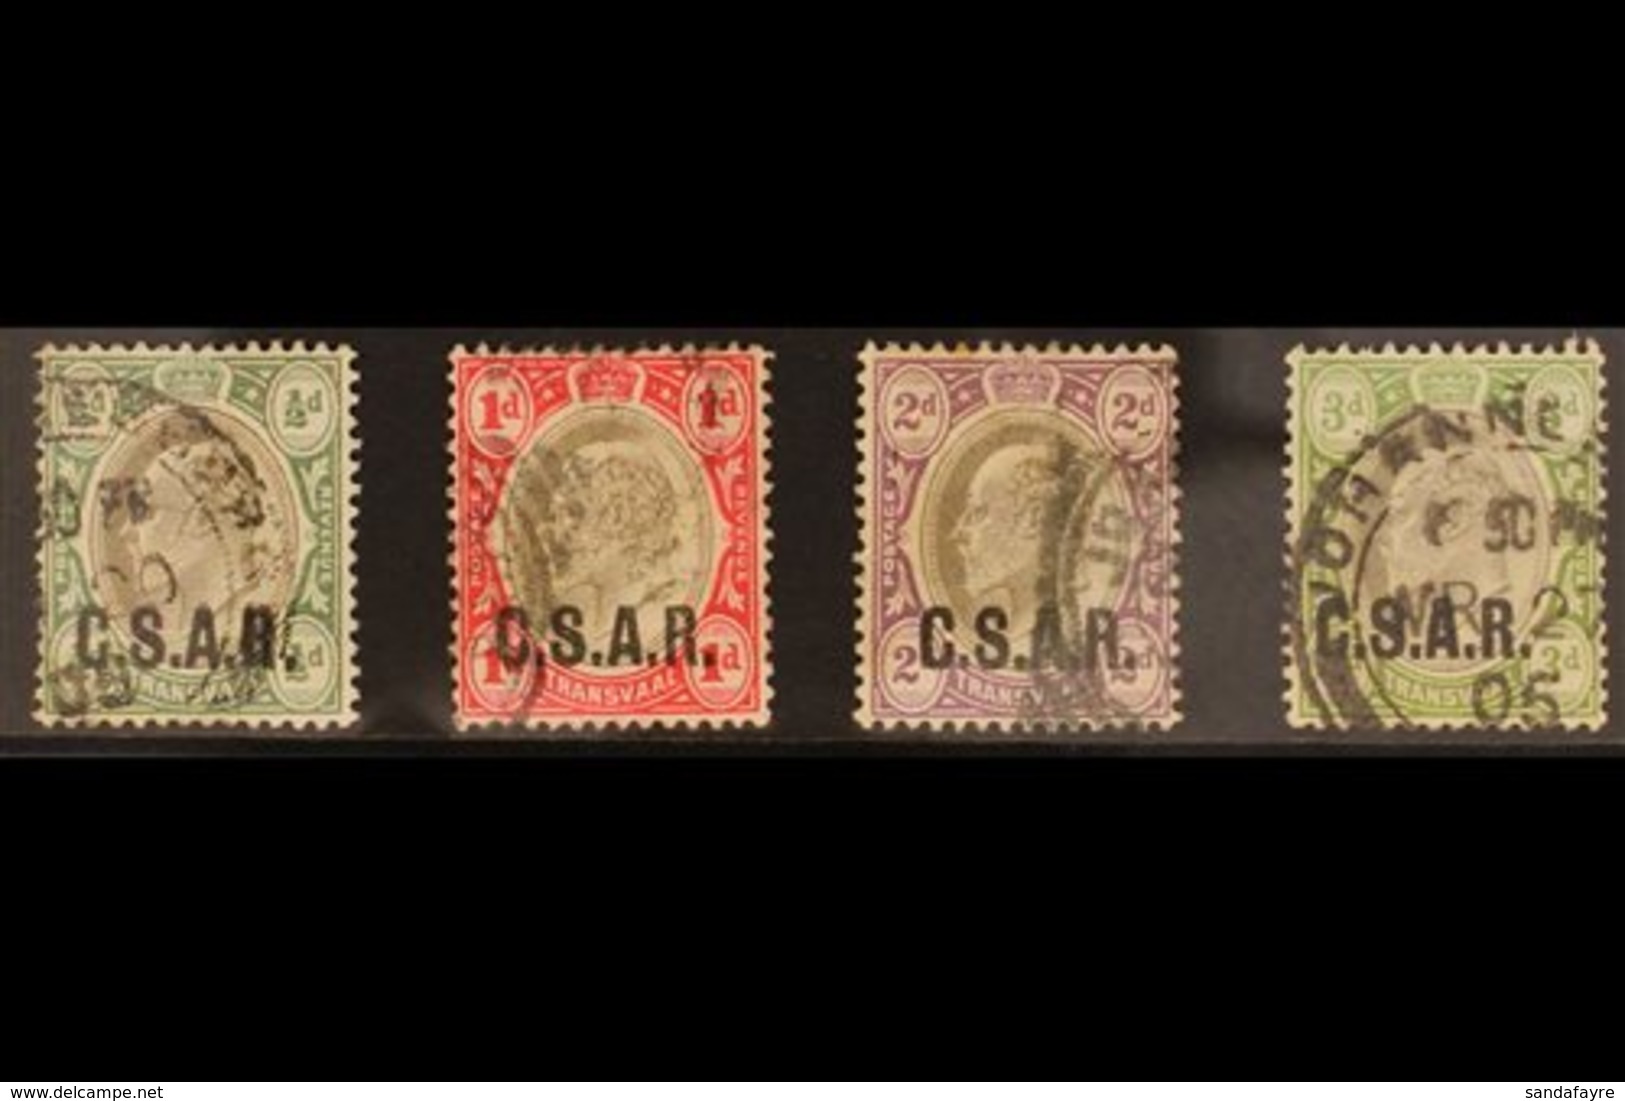 TRANSVAAL RAILWAY OFFICIAL STAMPS 1905 ½d, 1d, 2d, And 3d With "C.S.A.R." Overprints, SG RO3/RO6, Fine Used. (4 Stamps)  - Zonder Classificatie